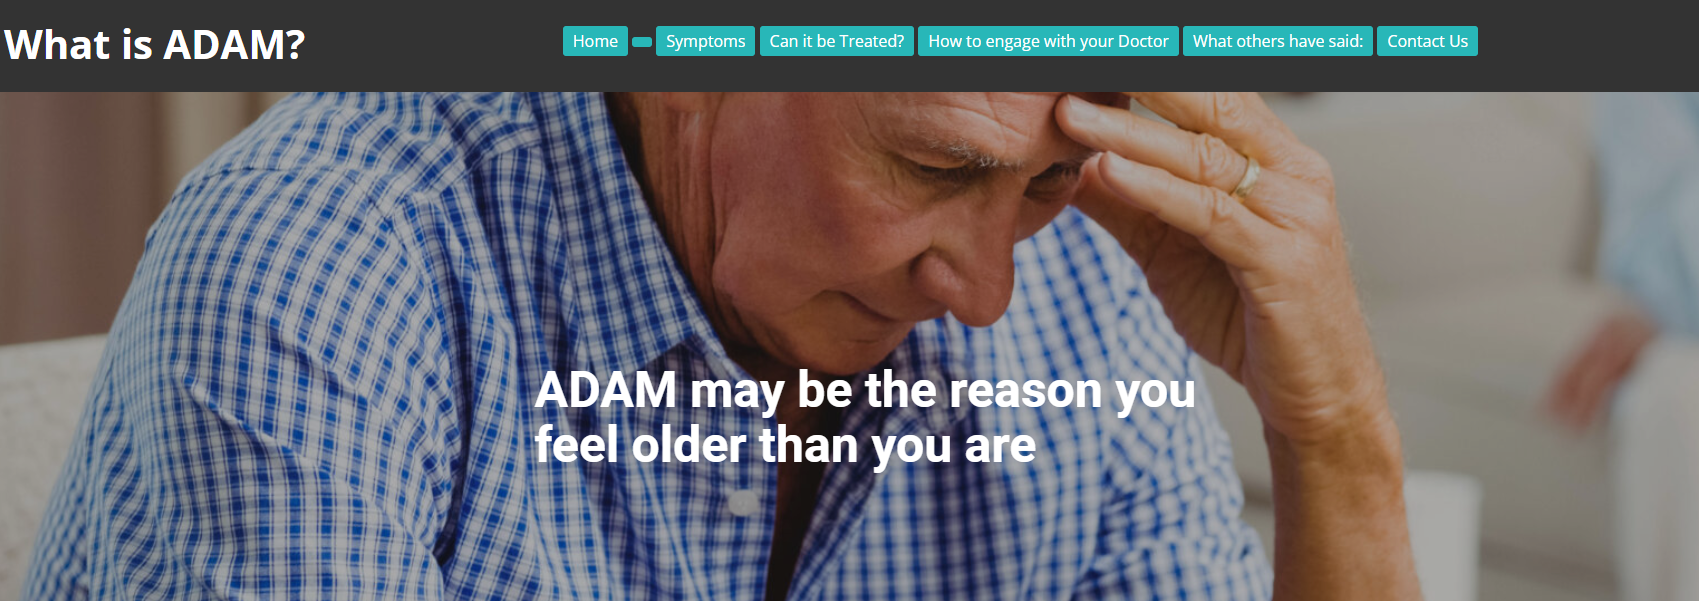 What is ADAM? – Patient Resource thumbnail